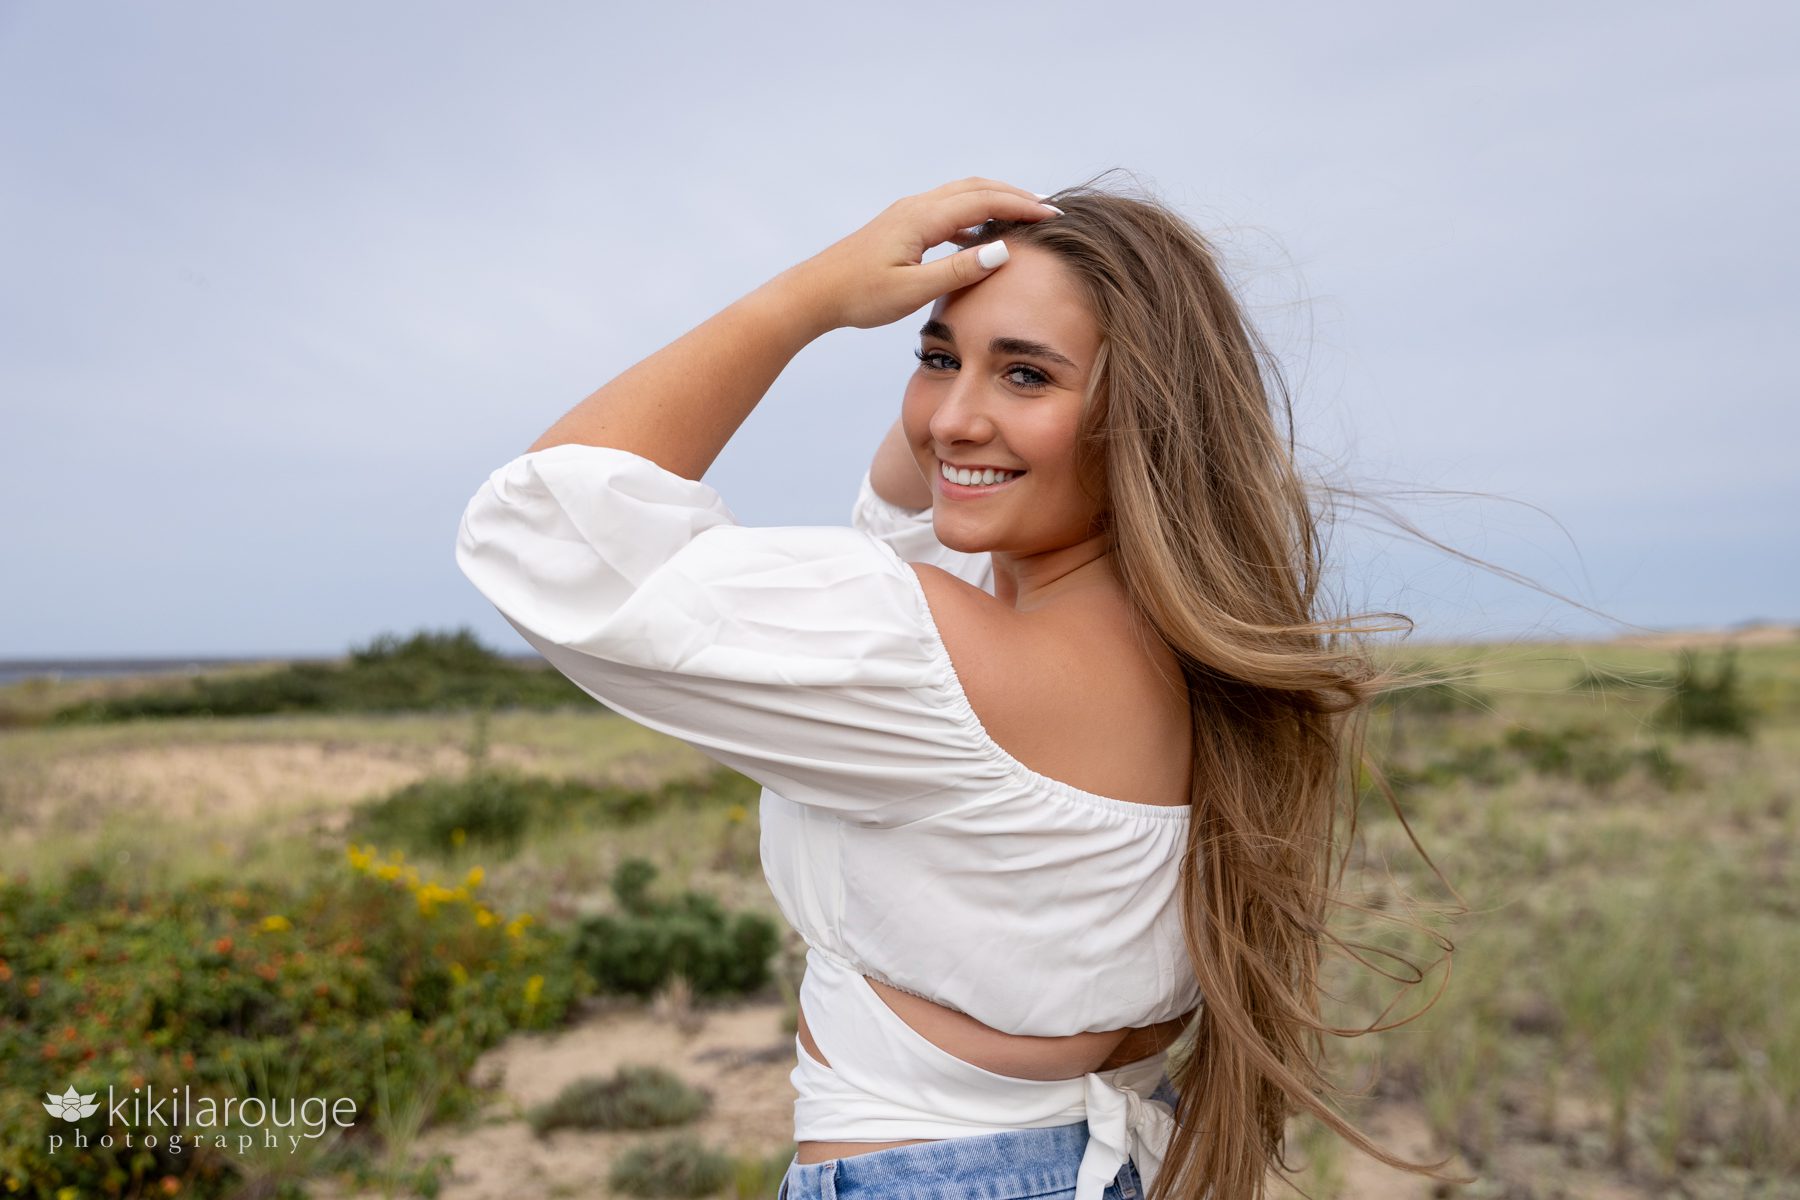 Triton Senior Portrait Girl in Jeans with white top tied in back at beach smiling with hands in air